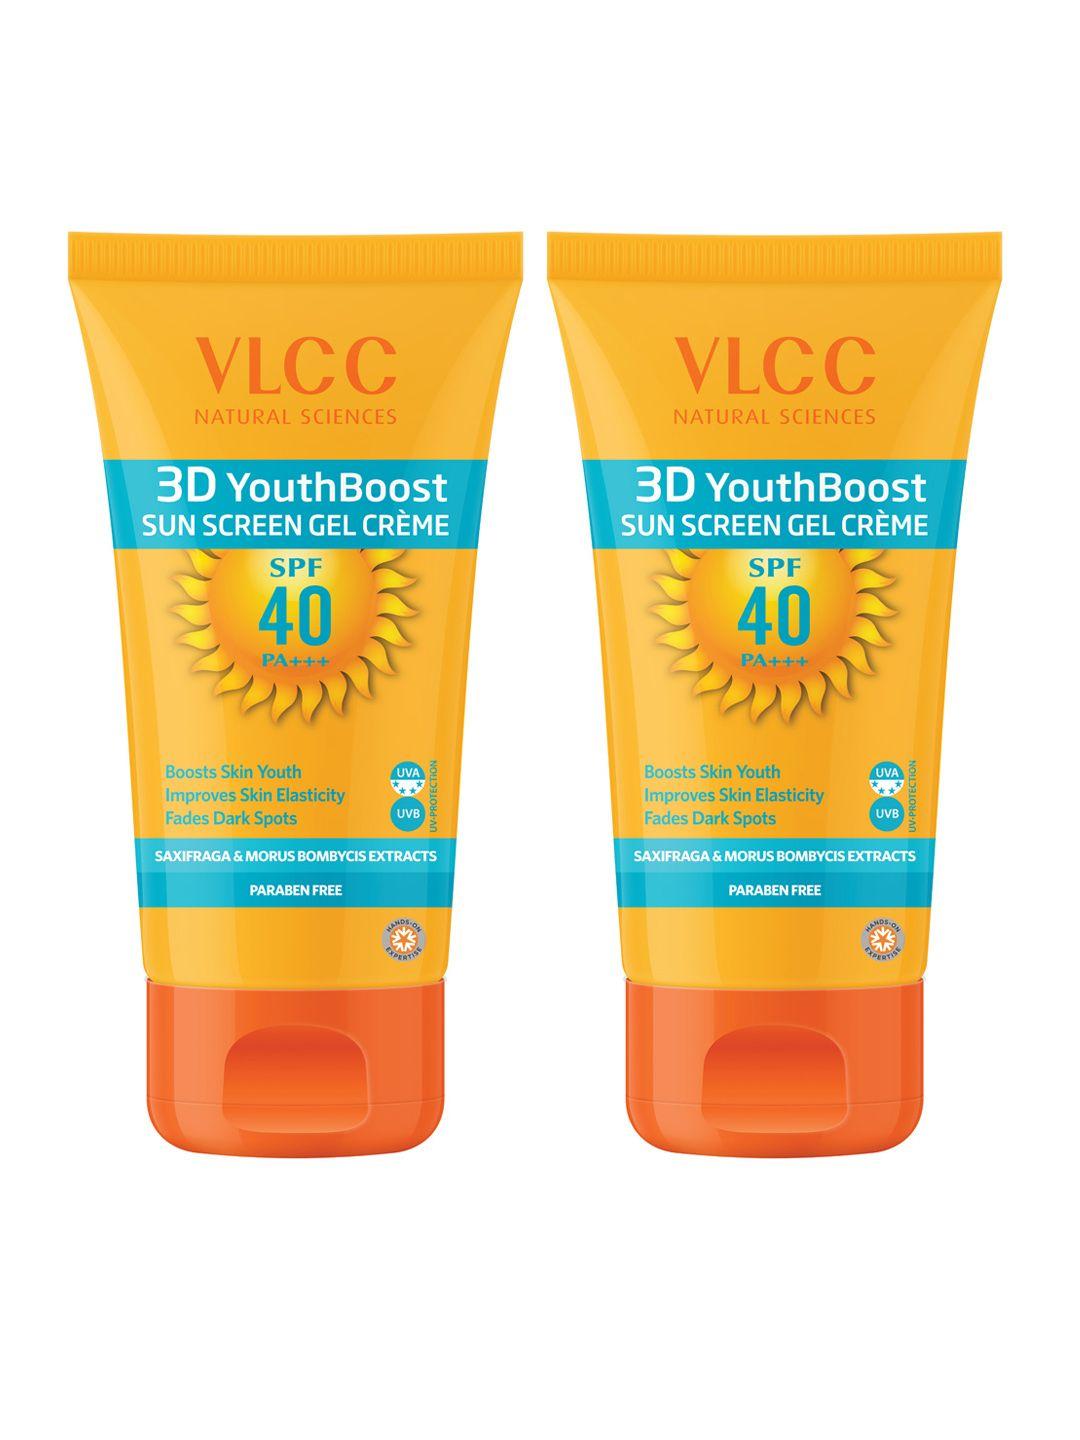 VLCC Unisex Pack of 2 3D Youth Boost SPF 40 Sunscreen Gel Creme